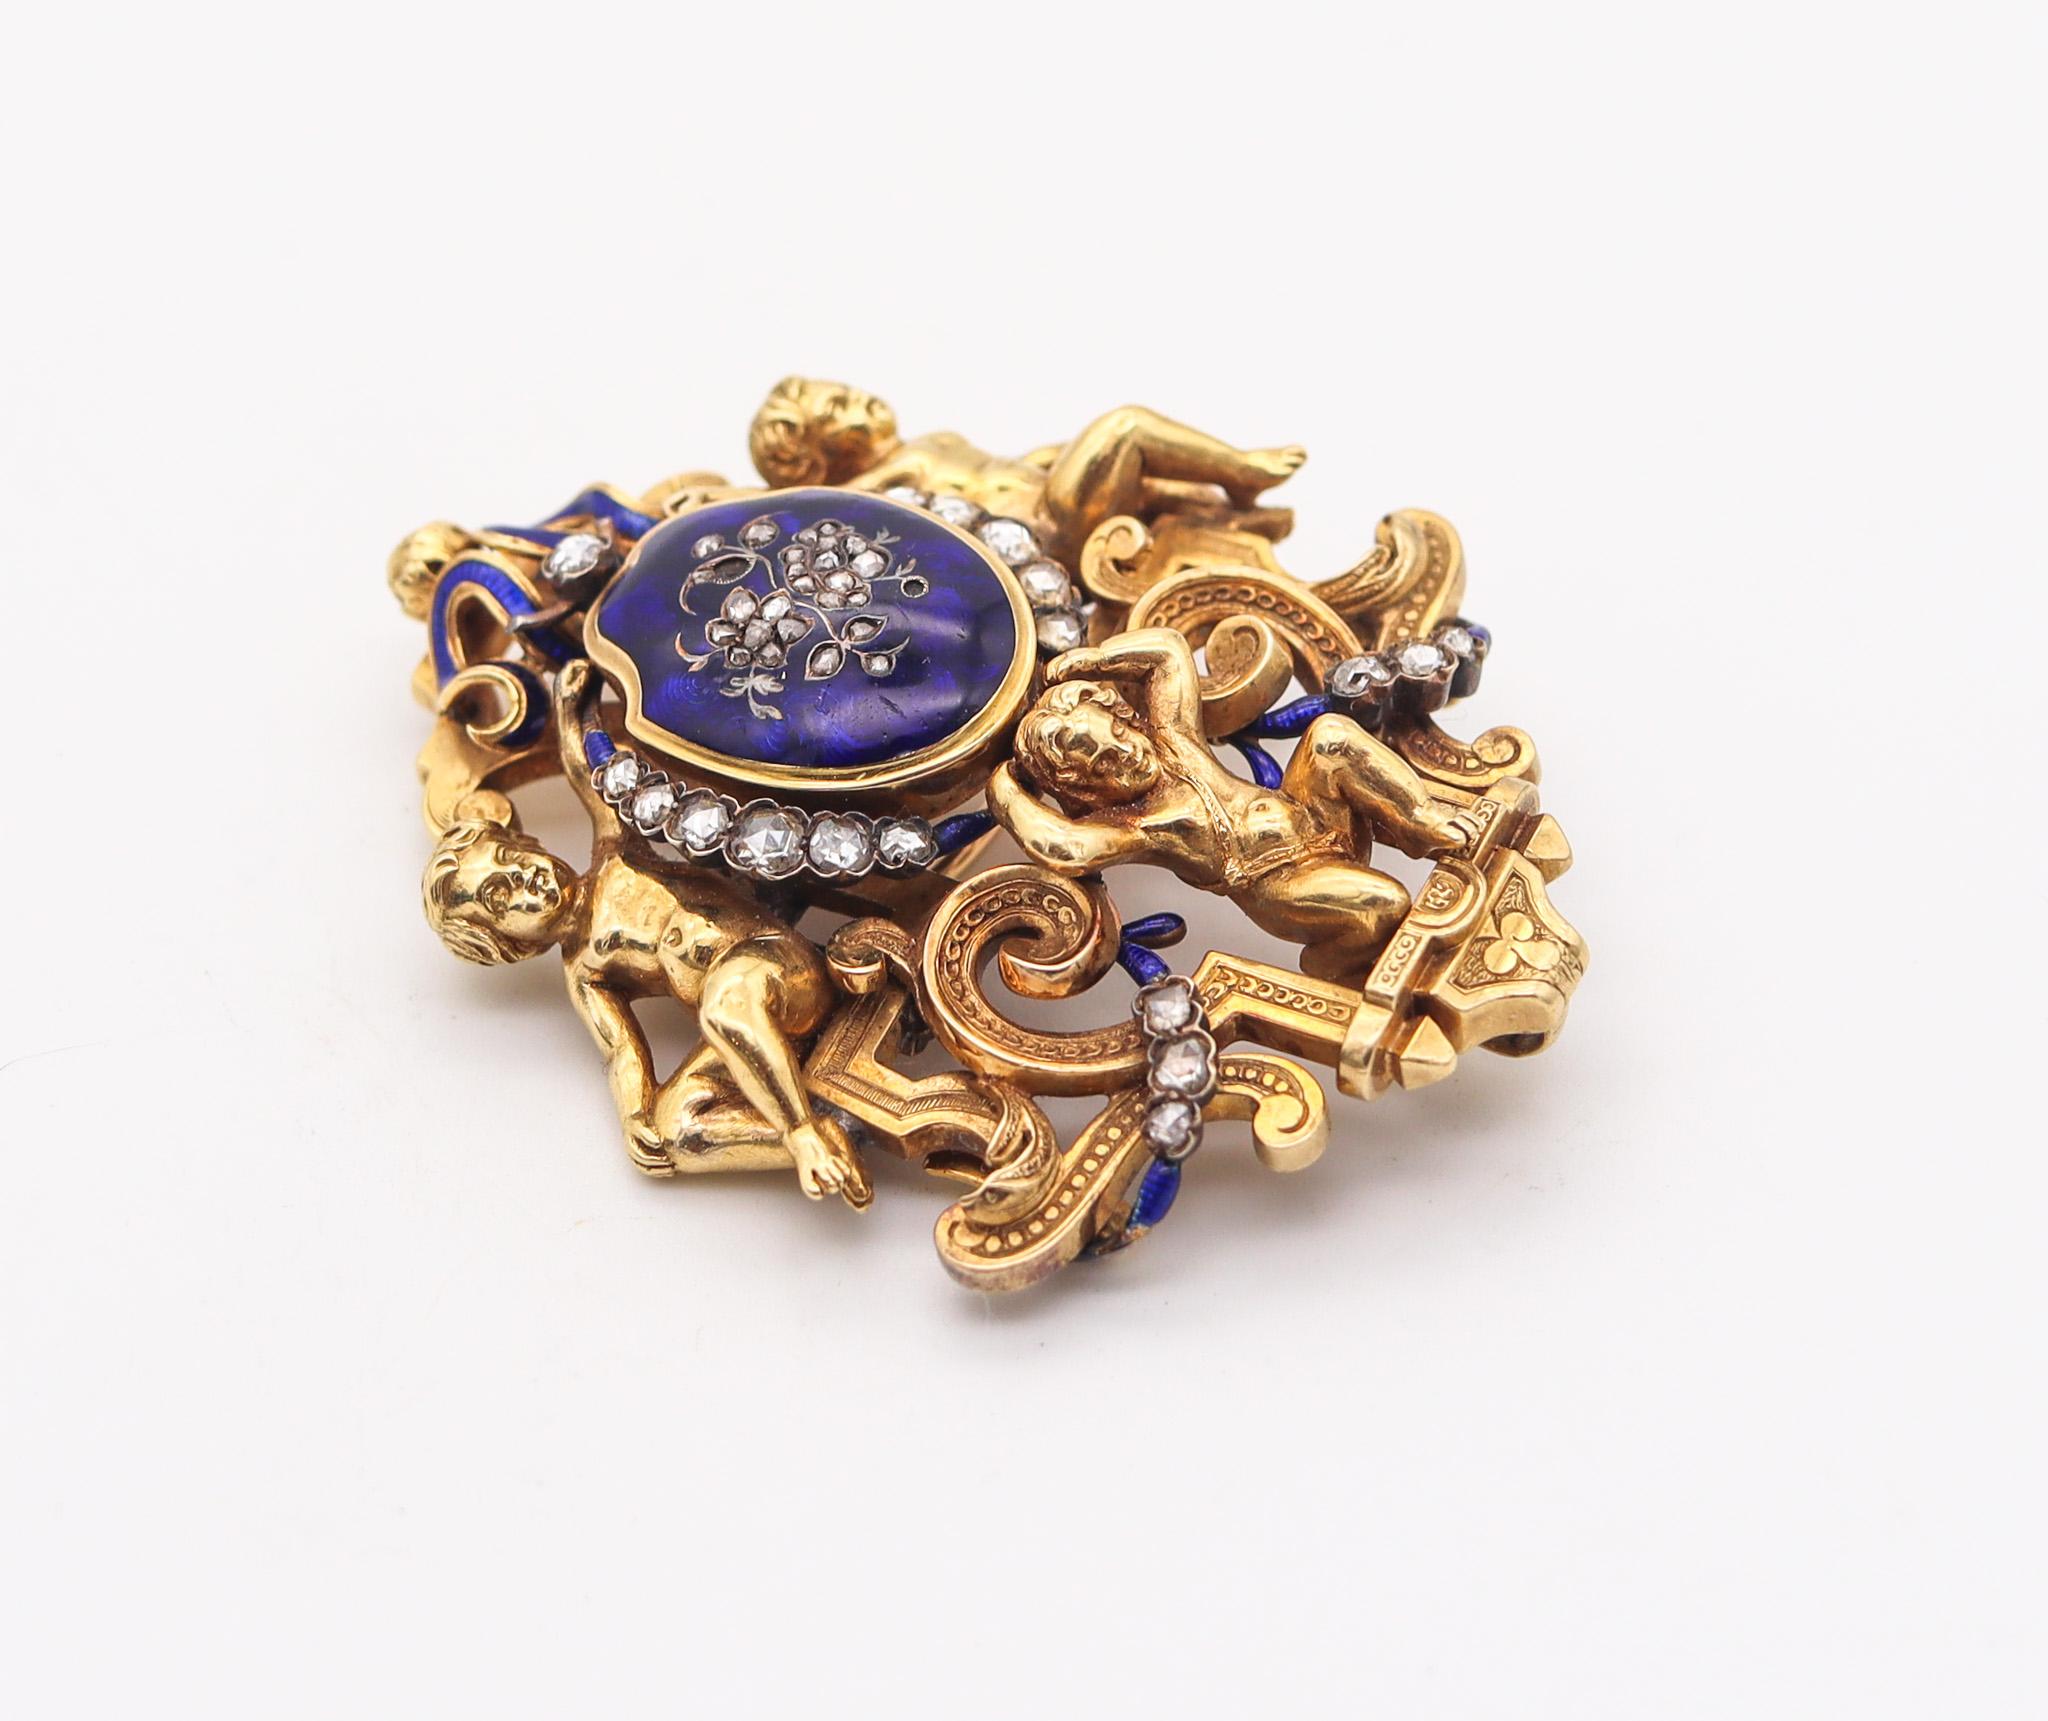 Georgian pendant brooch made in Austria.

An incredible antique pendant brooch, created in Austria during the Georgian period, back in the 1820. This fabulous piece has been crafted with classical neo-classical patterns in solid yellow gold of 18